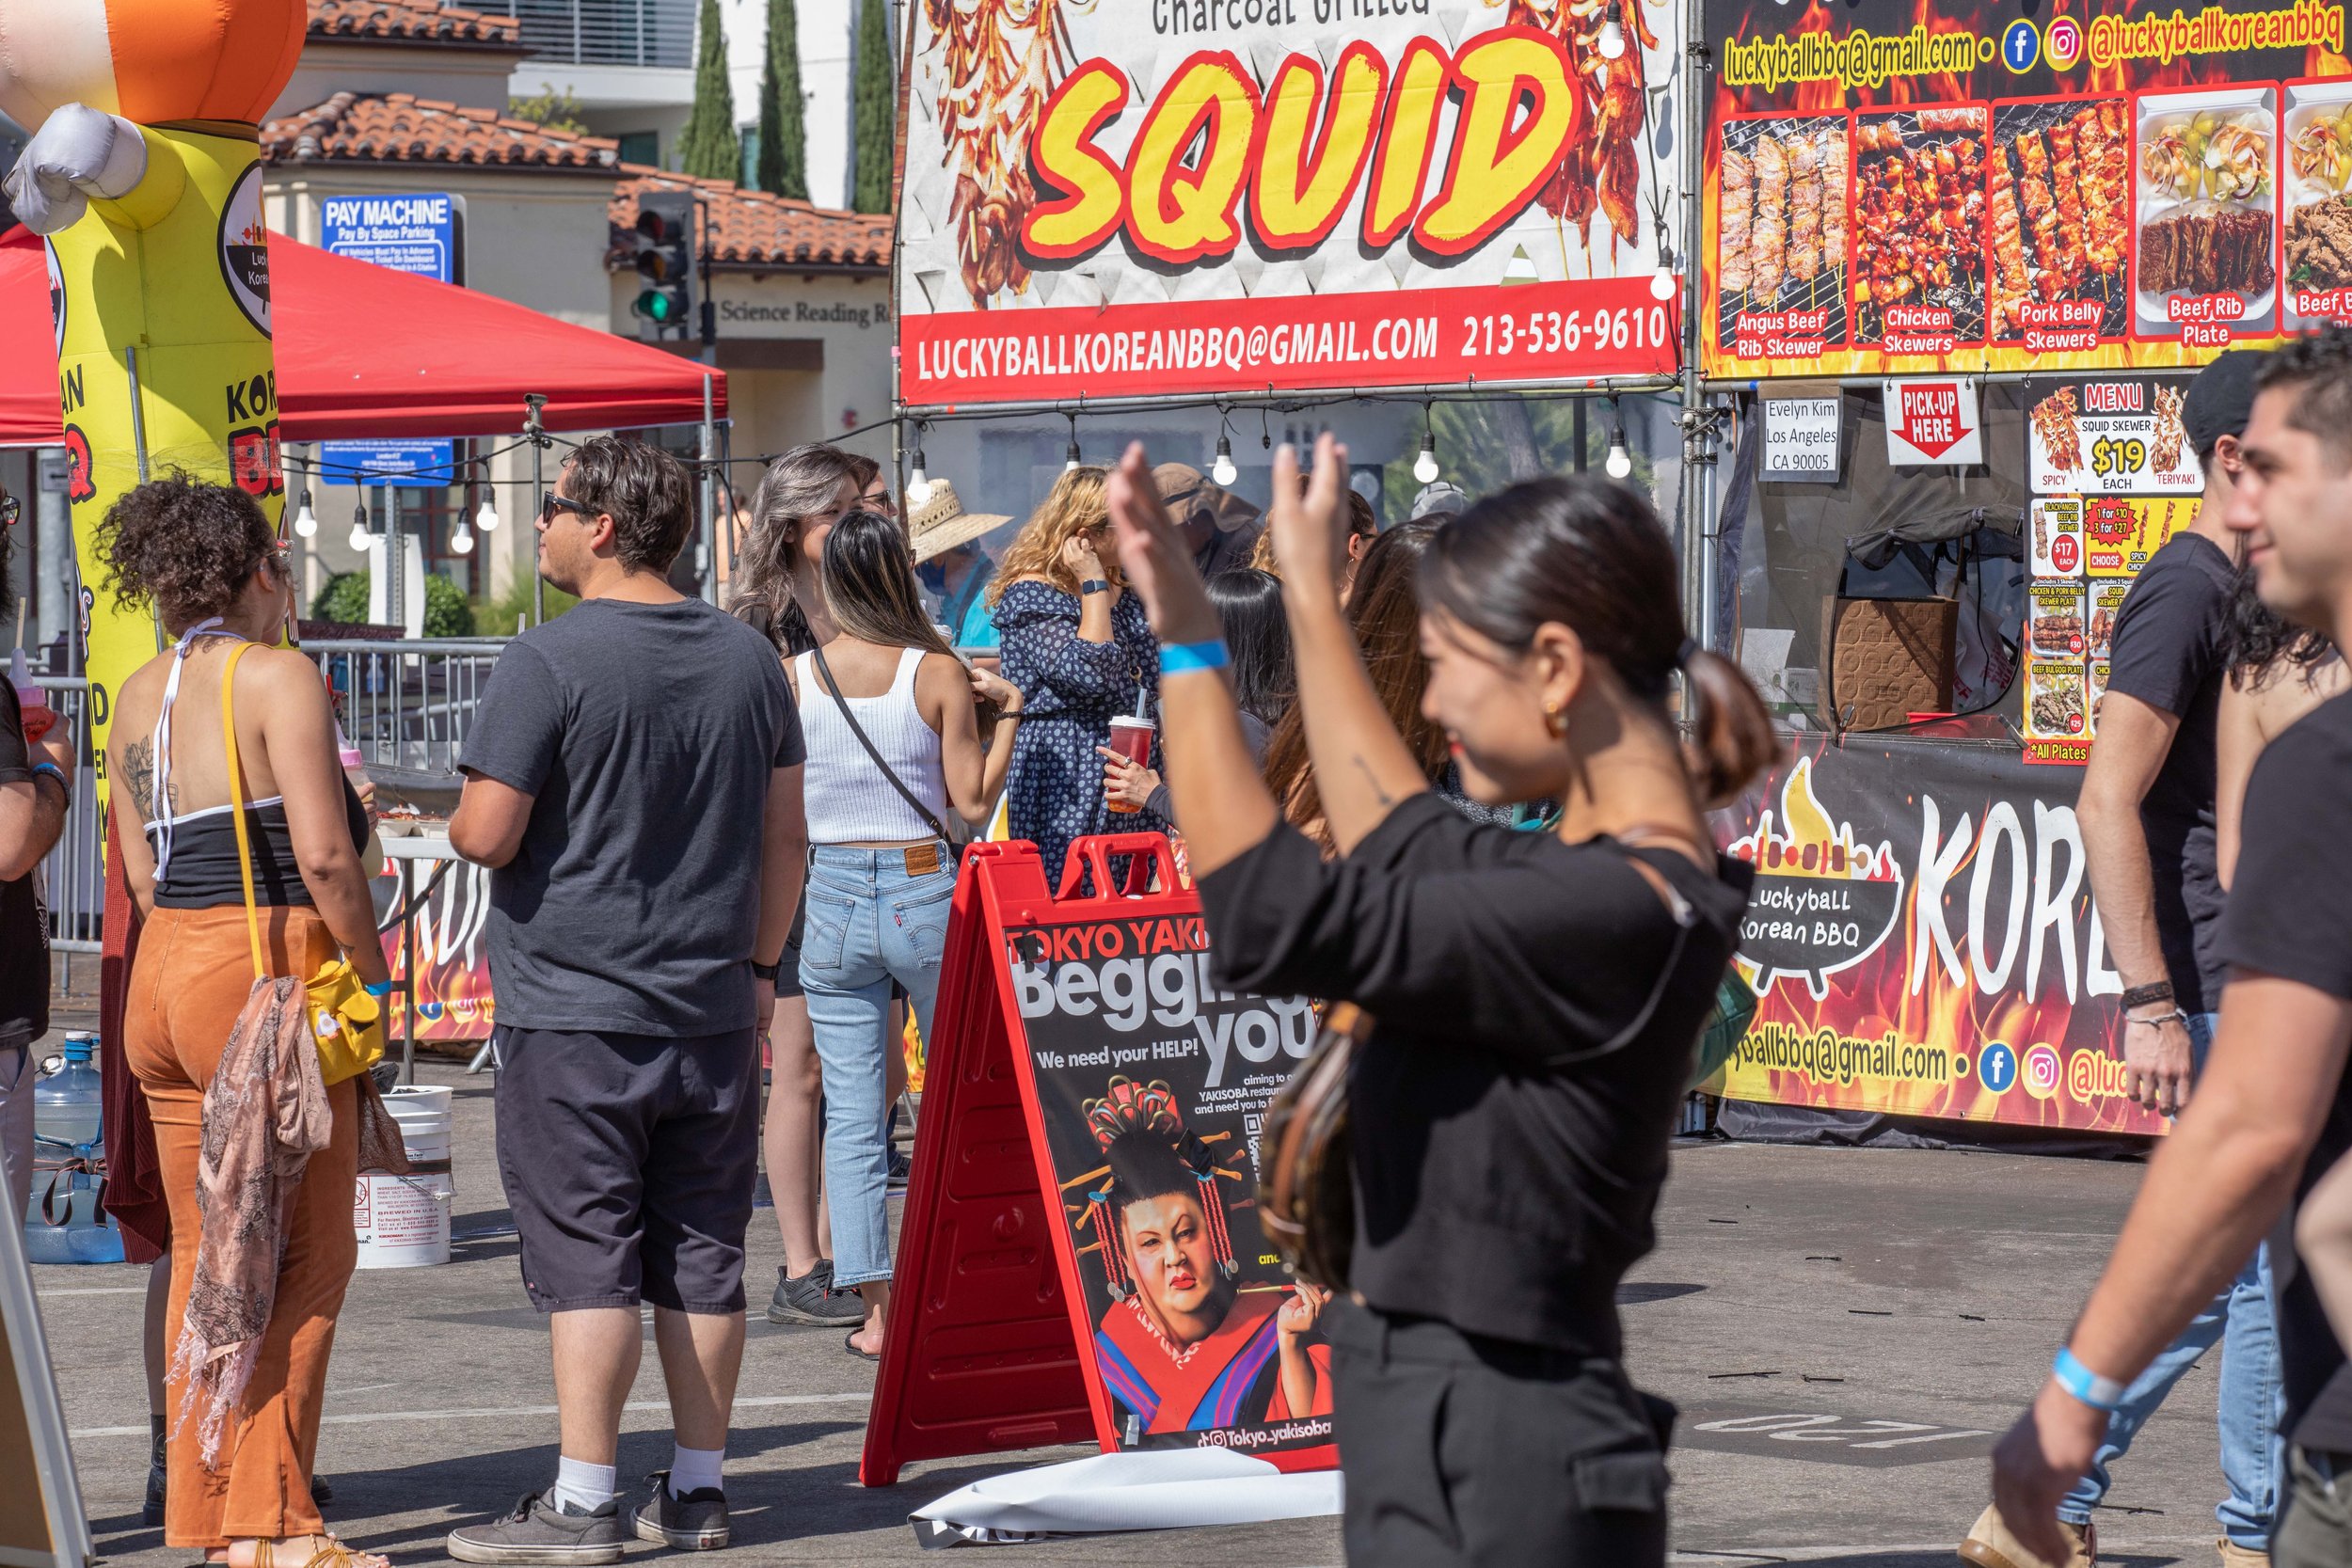  People gather and join at the open market event. Inspired by famous nighttime bazaars of Asia, 626 Night Market Mini was established in 2012, this large-scale market is named after the 626 area code region of San Gabriel Valley, northeast of Los Ang